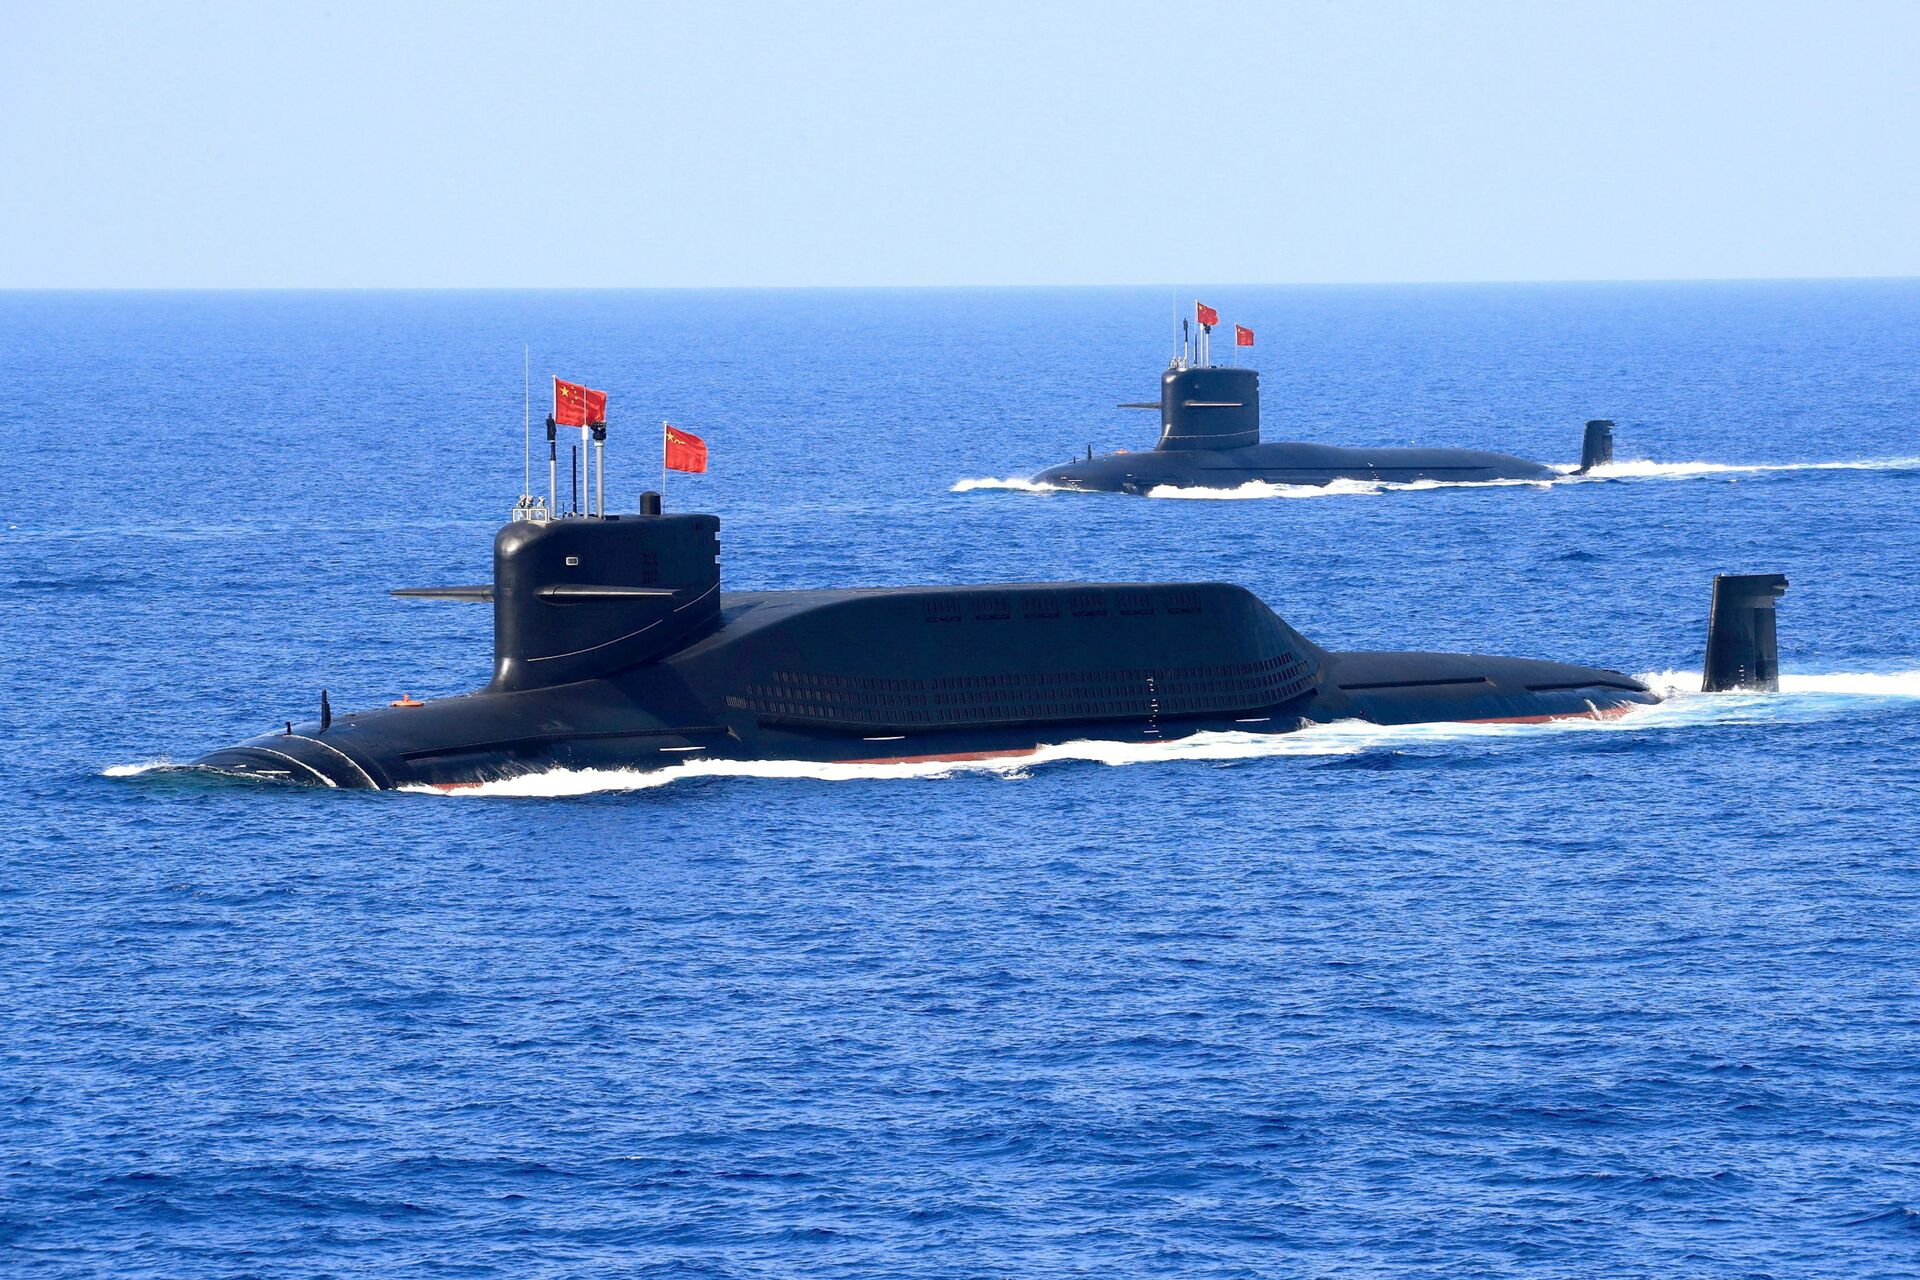 A nuclear-powered Type 094A Jin-class ballistic missile submarine of the Chinese People's Liberation Army (PLA) Navy is seen during a military display in the South China Sea April 12, 2018 - Sputnik International, 1920, 07.09.2021